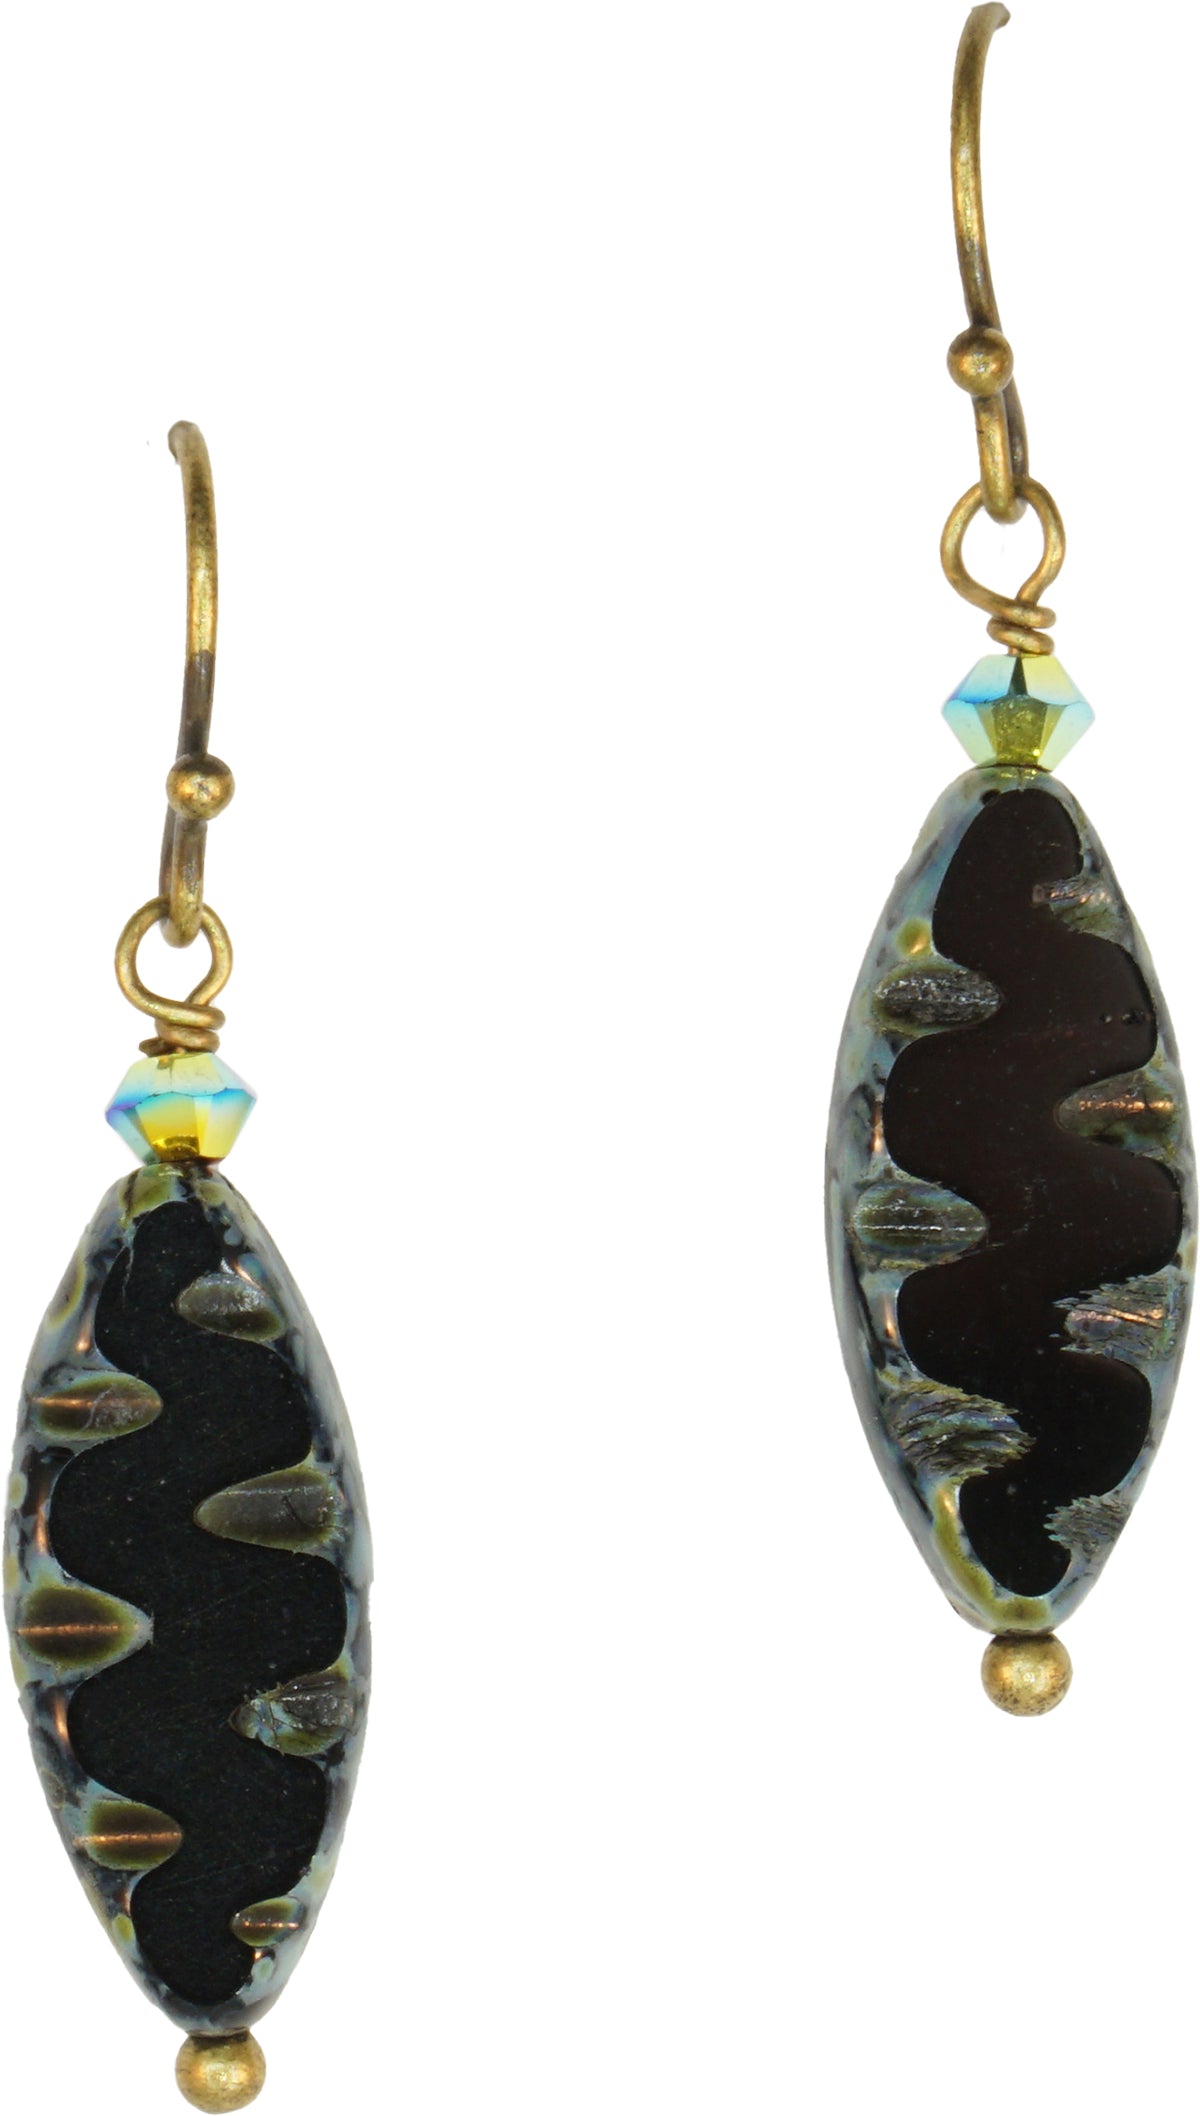 Earrings: Bits of Bliss: Black Etched Surfboard: Antique Brass Hook (Qty. 1 Pair)